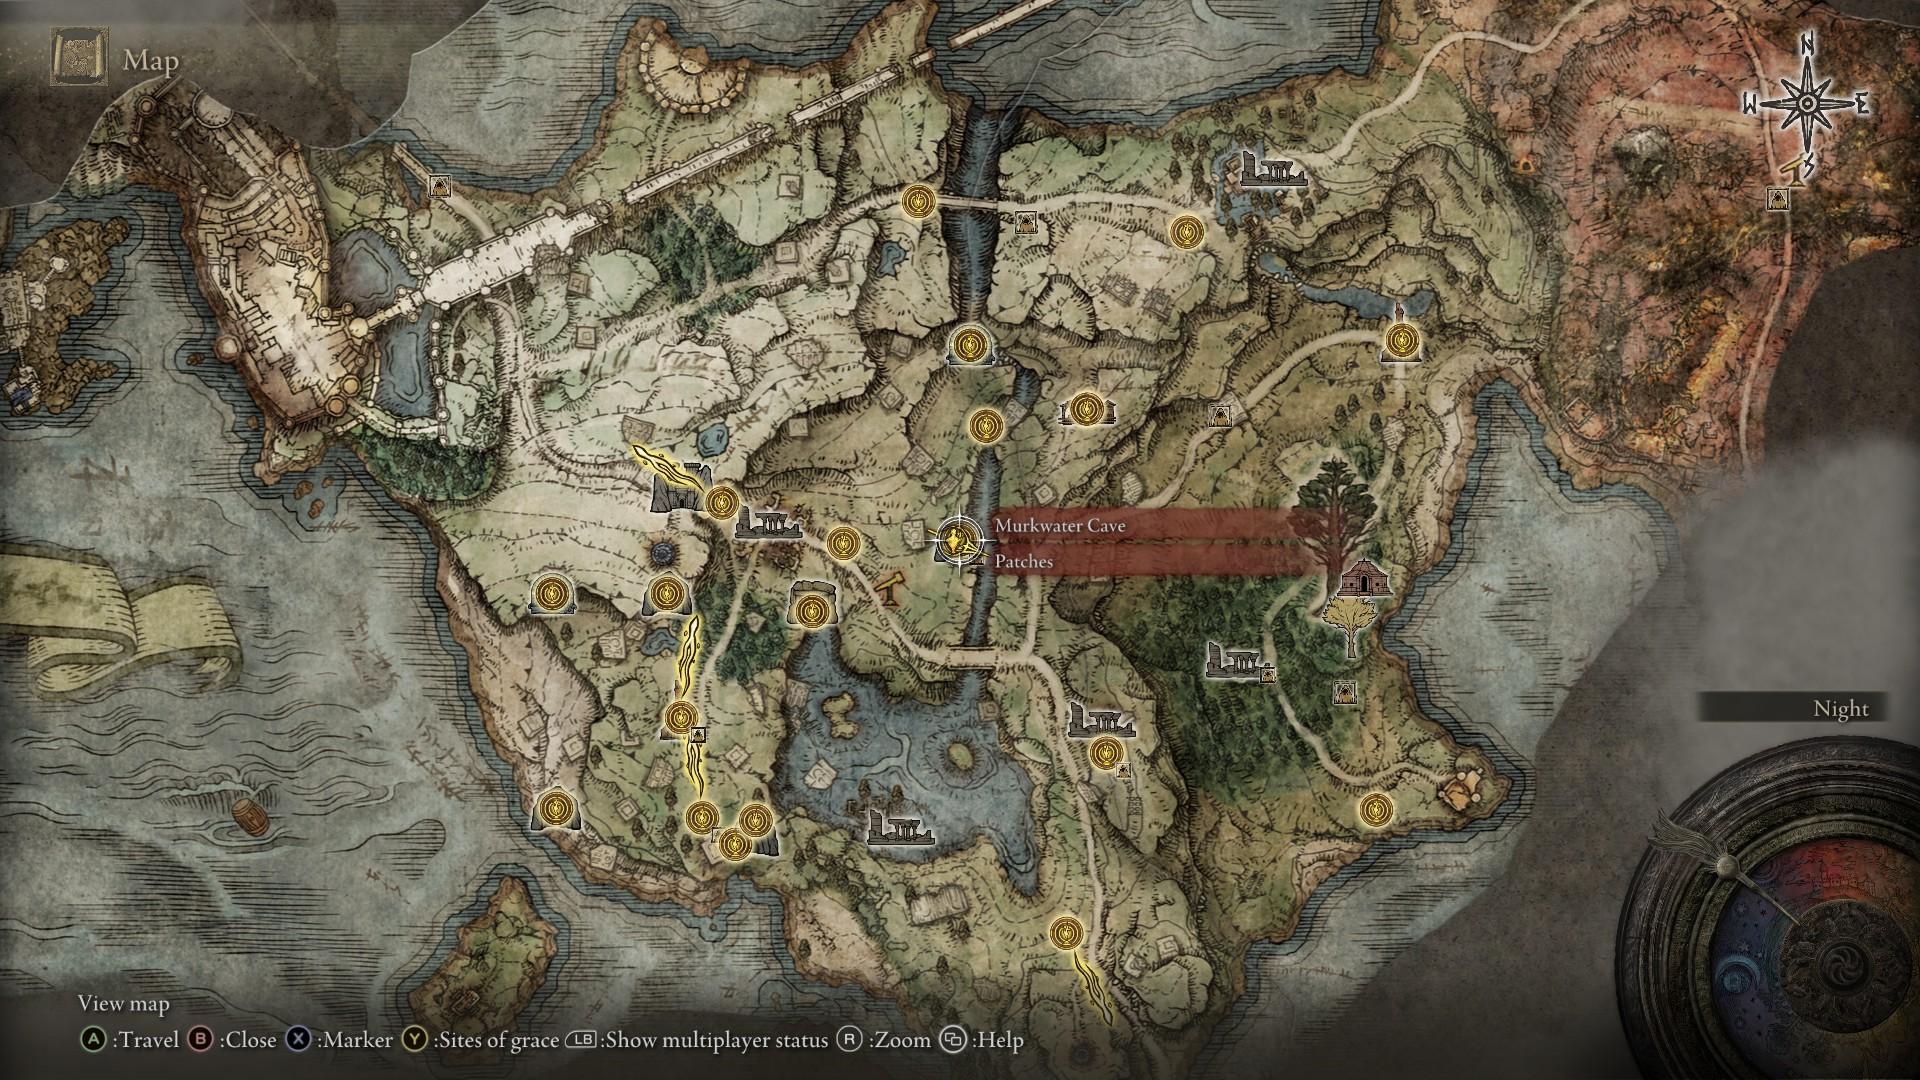 Murkwater Cave location on Elden Ring’s map